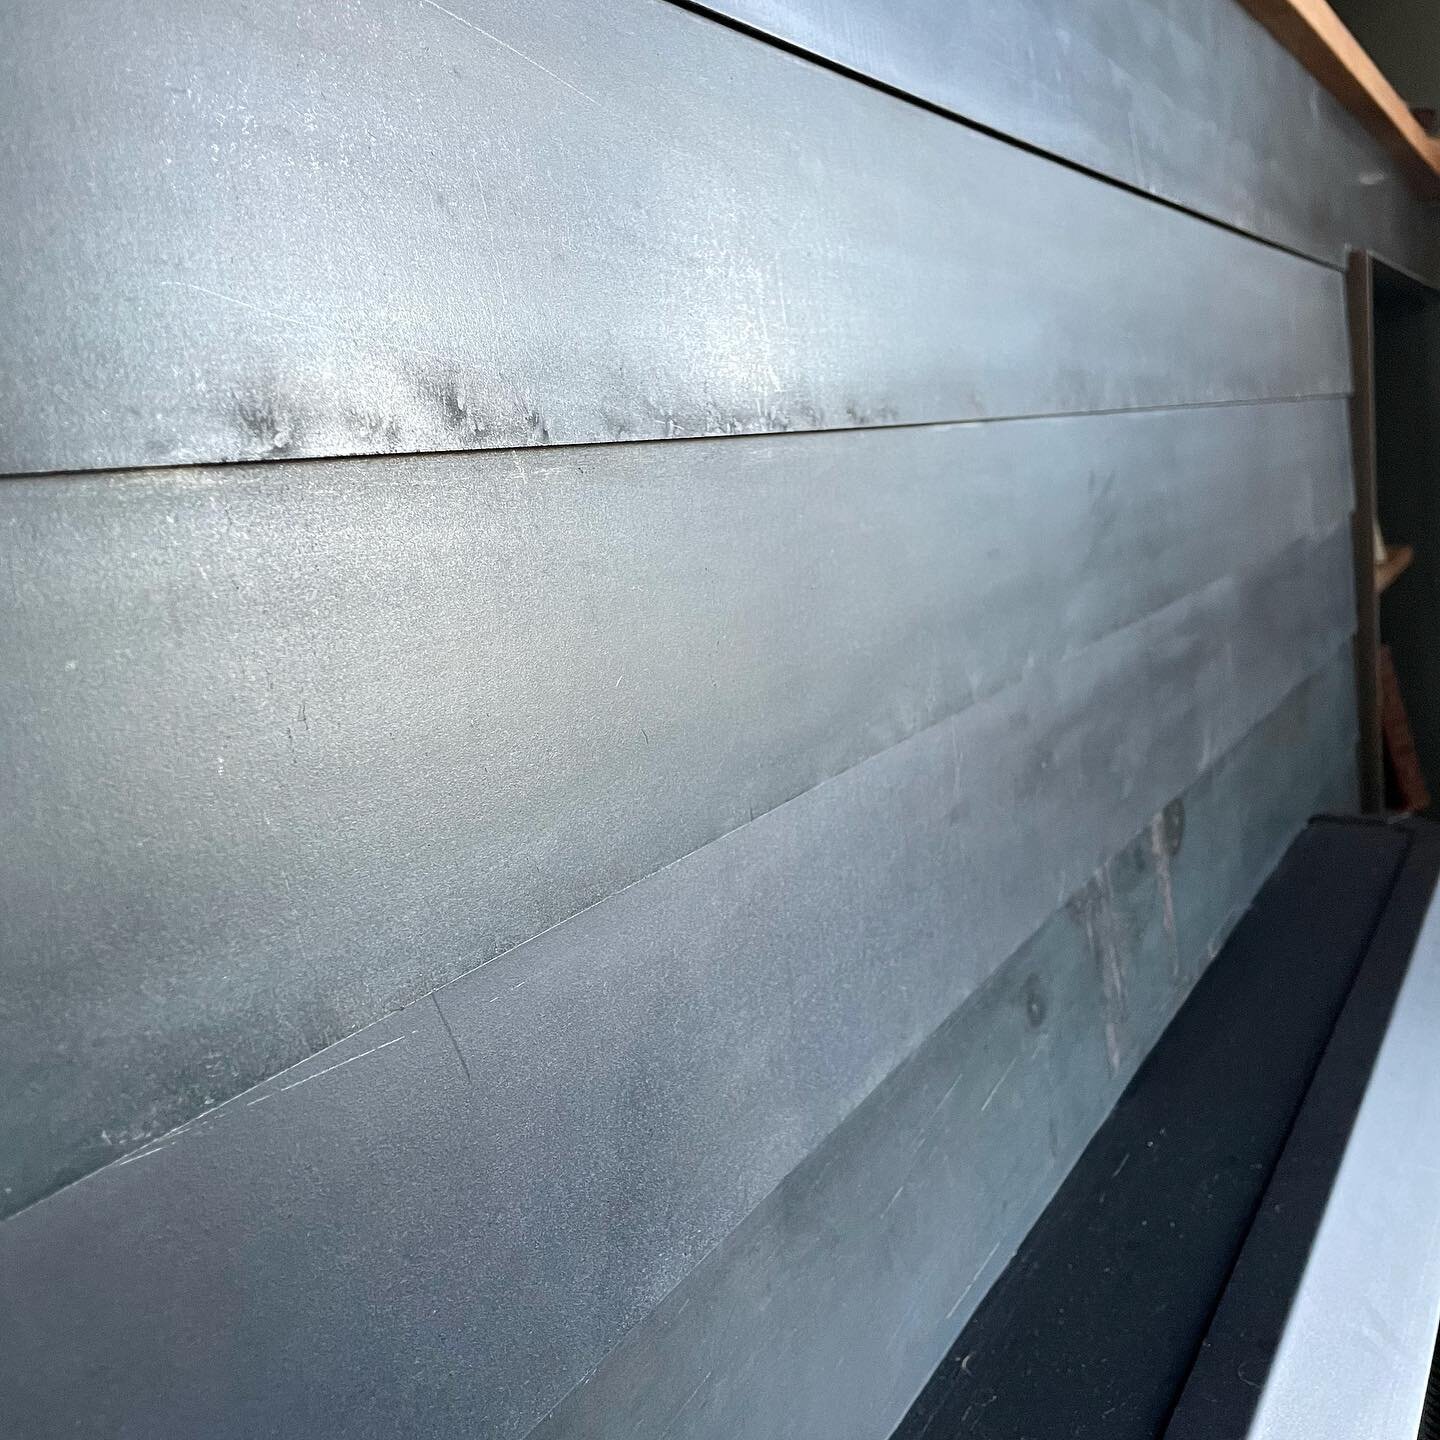 An interesting custom fireplace surround. Strips of steel overlaying each other brings more texture to this dramatic space. #steelfabrication #chattanoogatn #chattanoogabusiness #smallbusinessmarketing #americanmadefurniture #architecture_minimal #fi